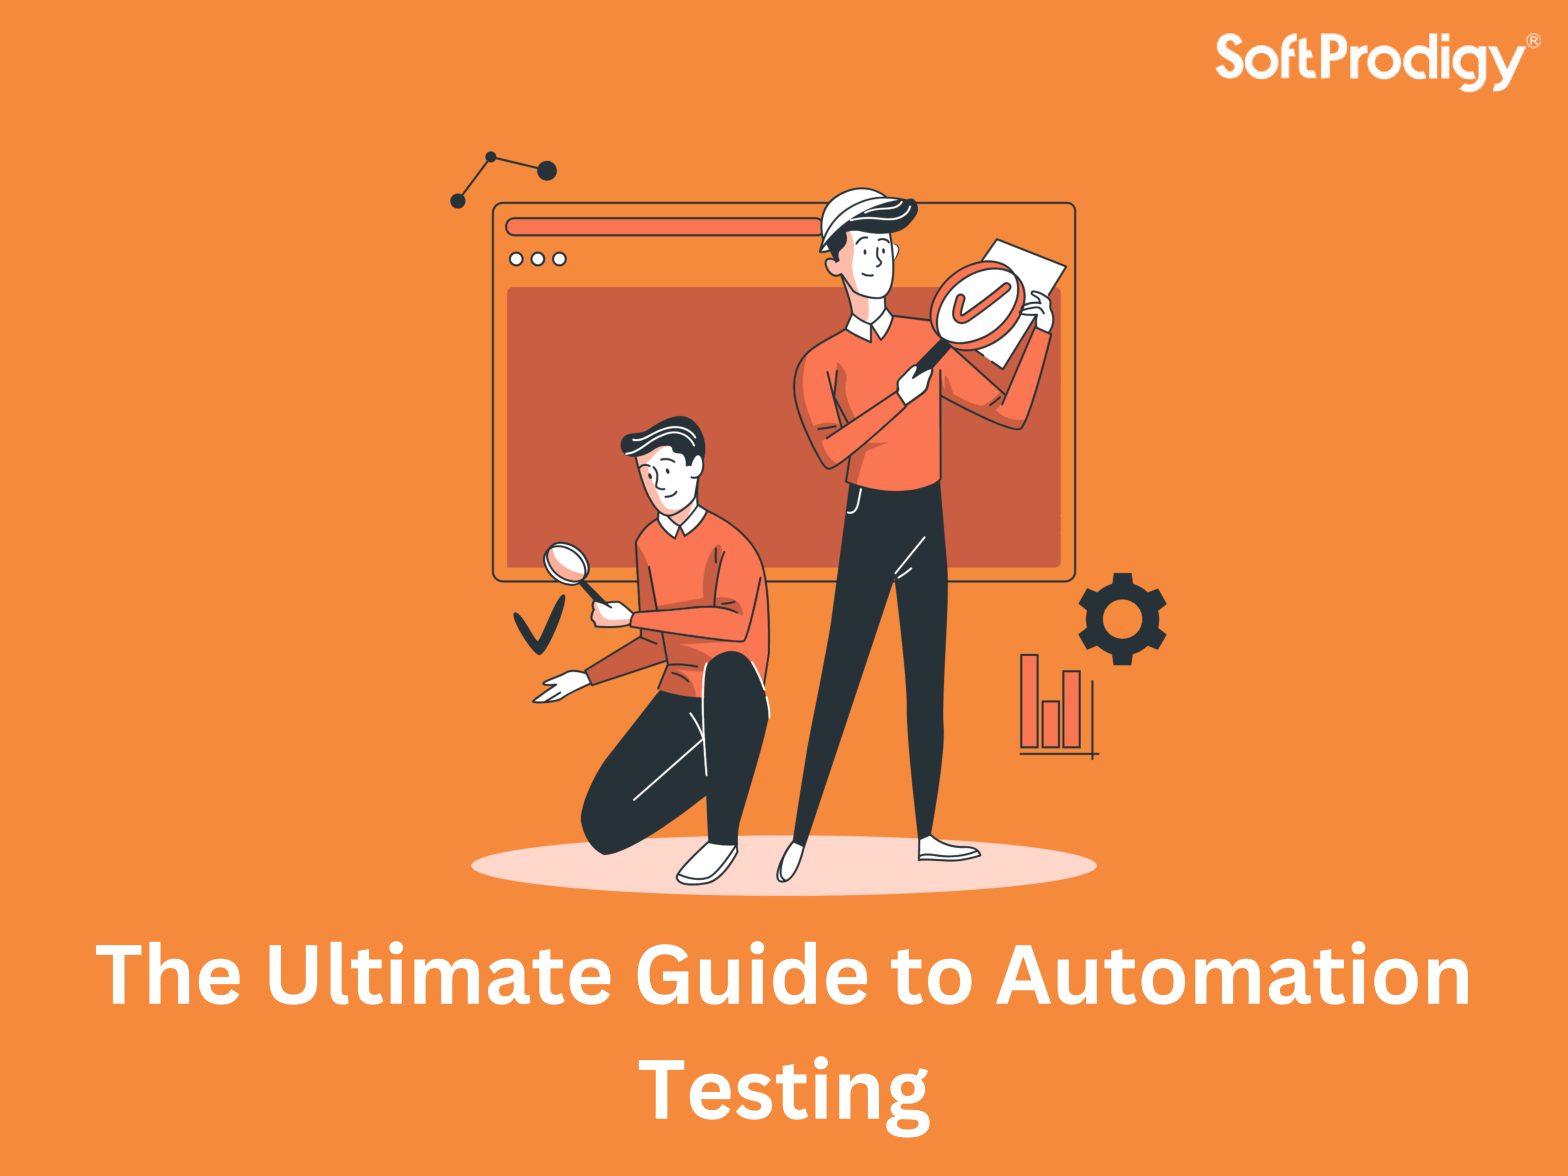 The Ultimate Guide to Automation Testing